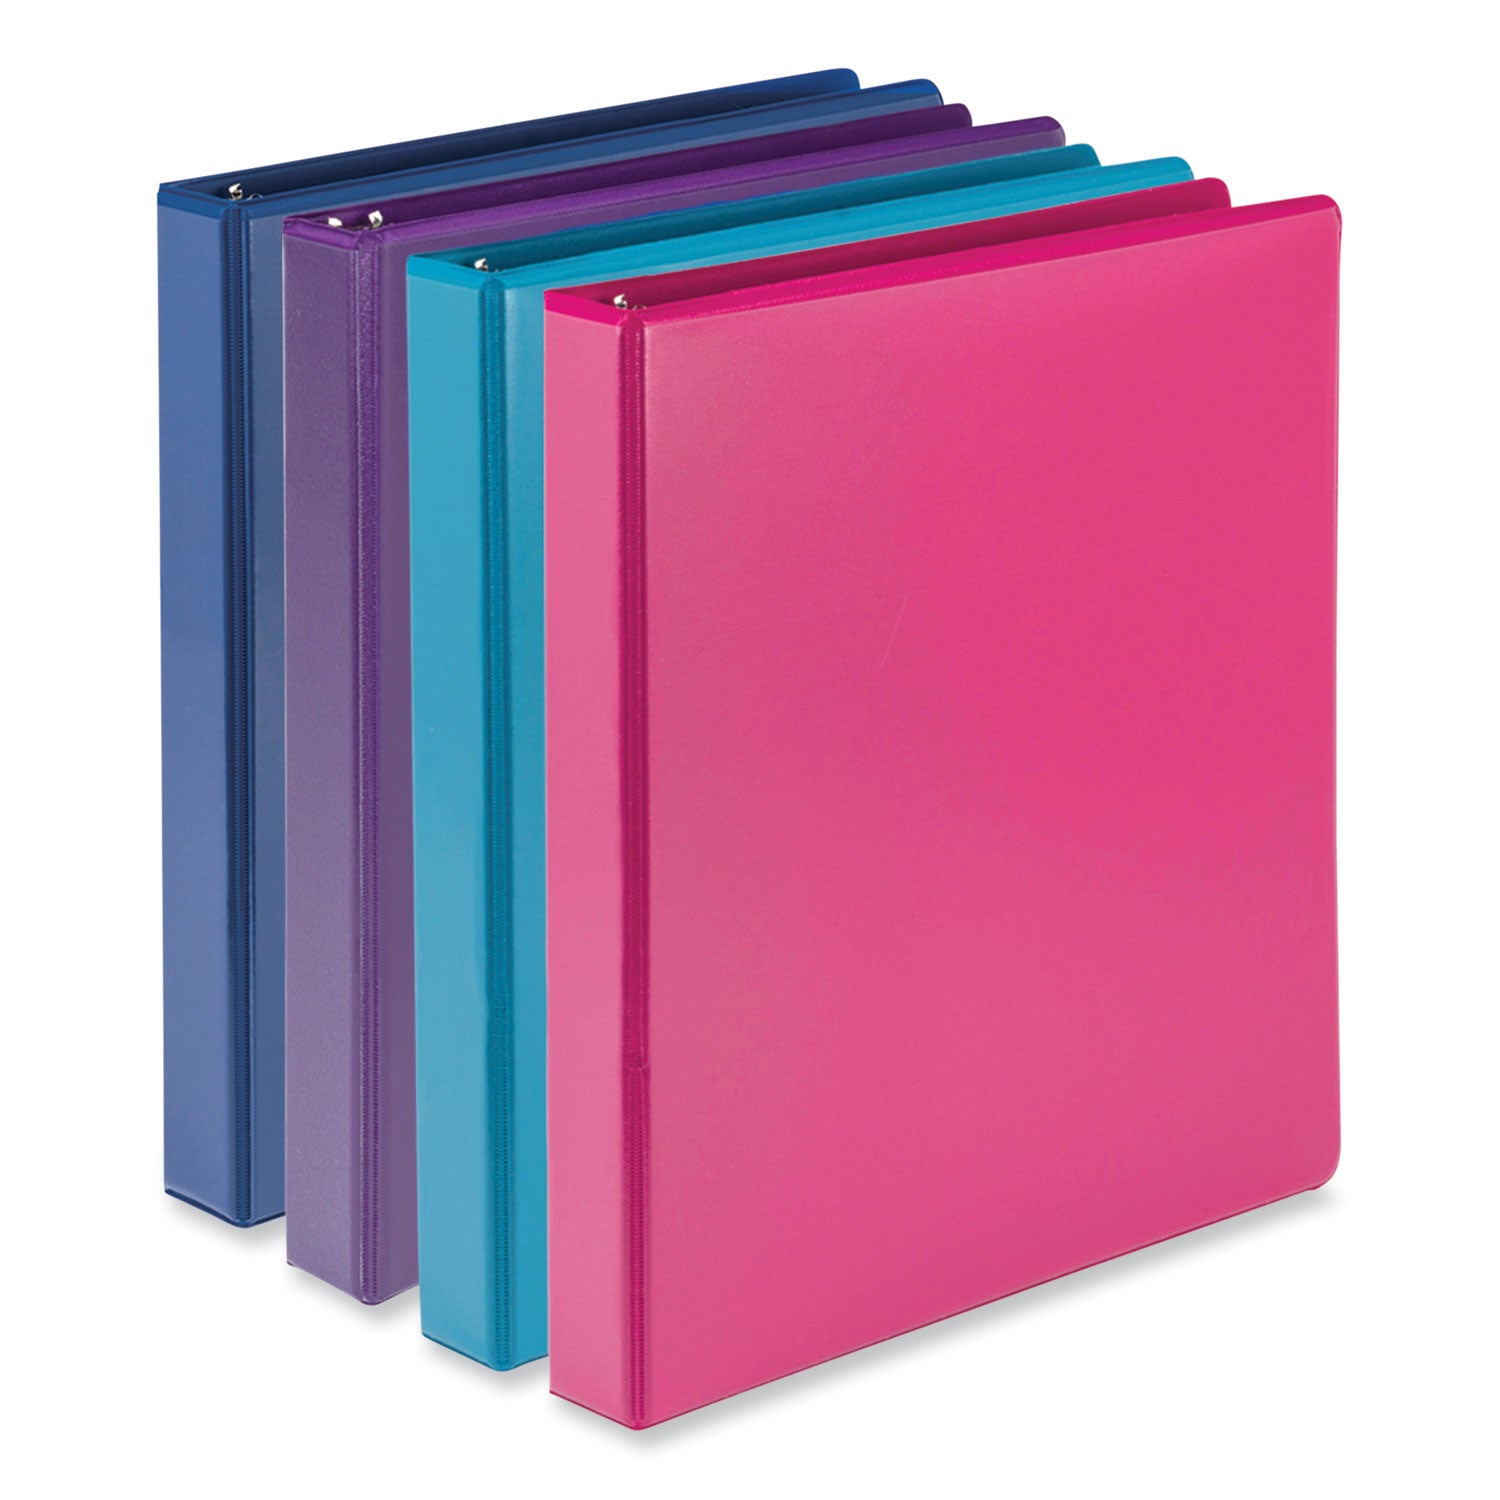 durable-d-ring-view-binders-3-rings-1-capacity-11-x-85-blueberry-blue-coconut-dragonfruit-purple-4-pack_sammp46439 - 1